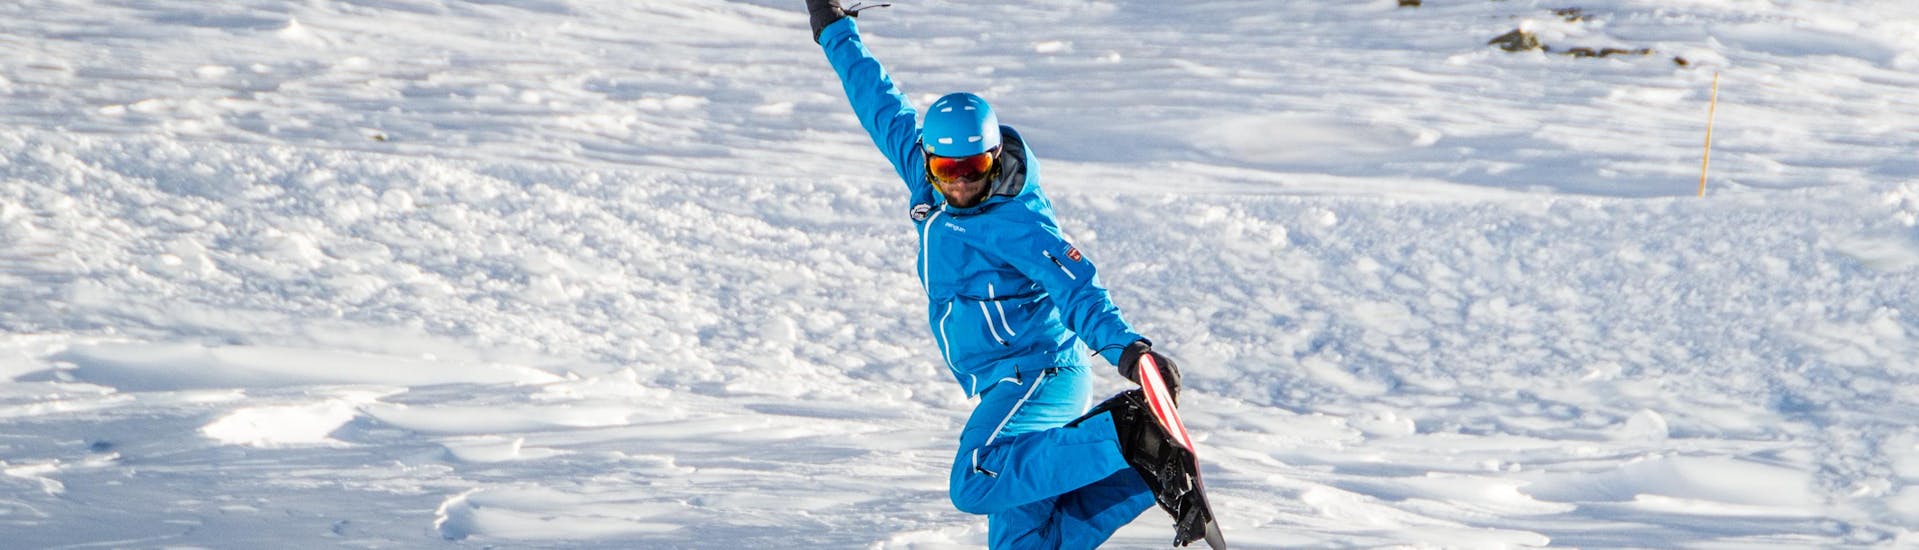 Freestyle Skiing Lessons for Youngsters (from 8 y.) with Ski School ESKIMOS Saas-Fee - Hero image